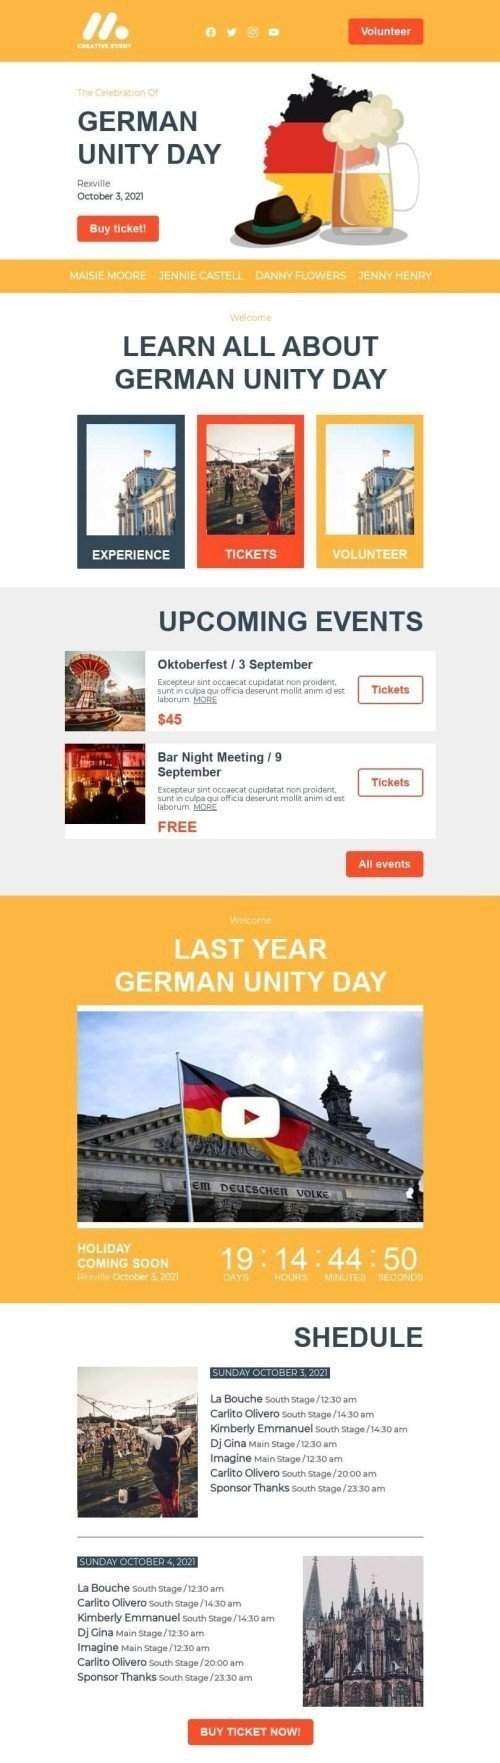 German Unity Day Email Template "Creative event" for Hobbies industry desktop view